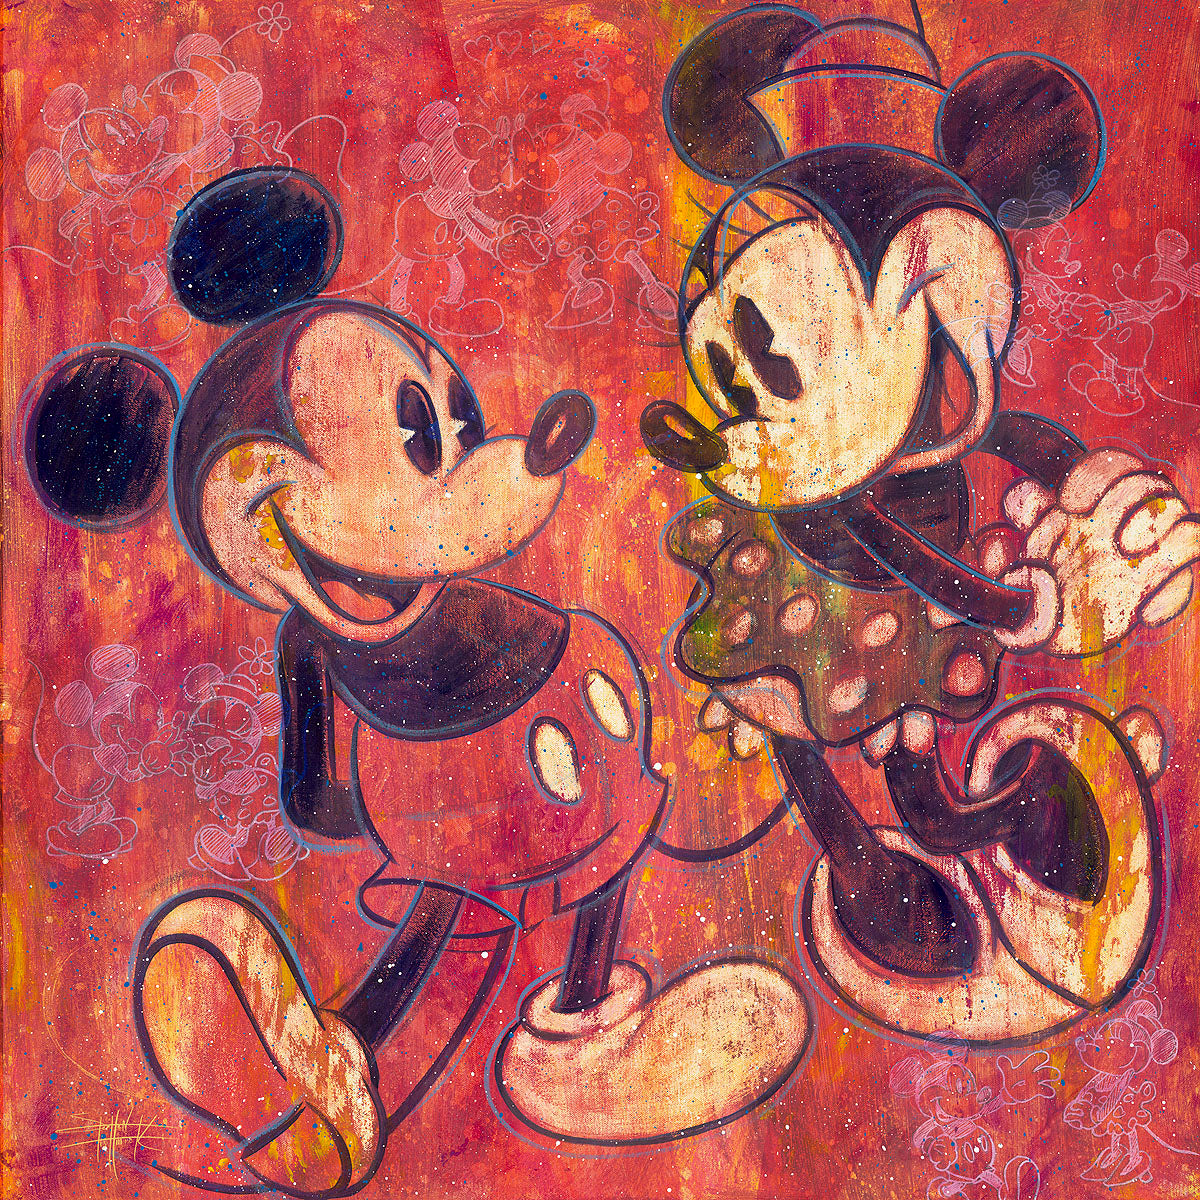 Drawn Together by Stephen Fishwick Featuring Mickey and Minnie Mouse